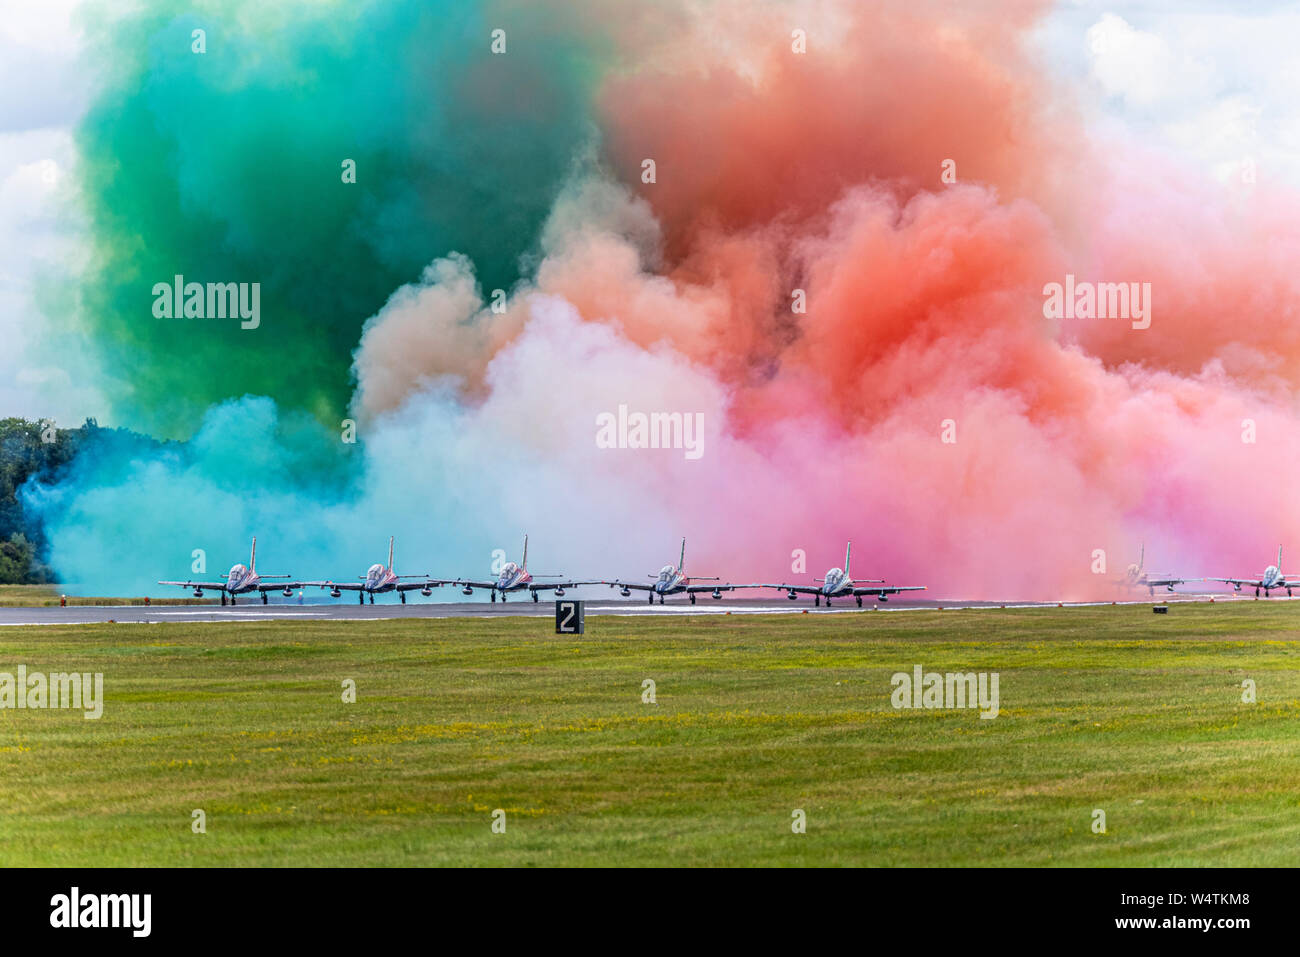 Italian Air Force Aeronautica Militare Frecce Tricolori display team testing smoke systems creating billowing green, white and red flag colours Stock Photo